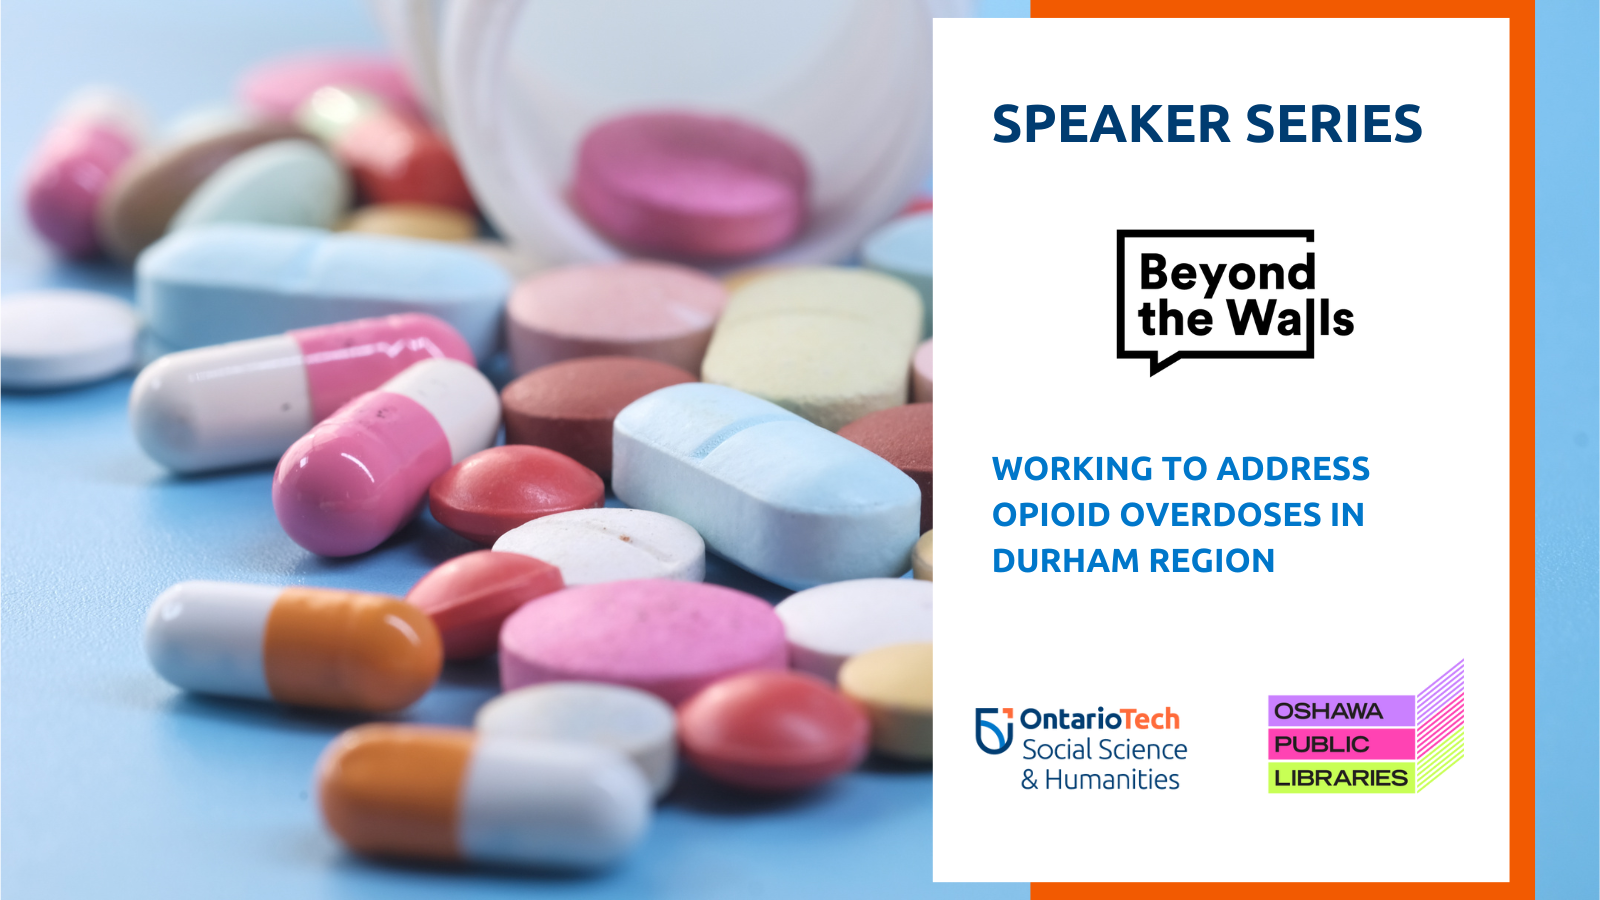 Image for "Working to Address Opioid Overdoses in Durham Region". 